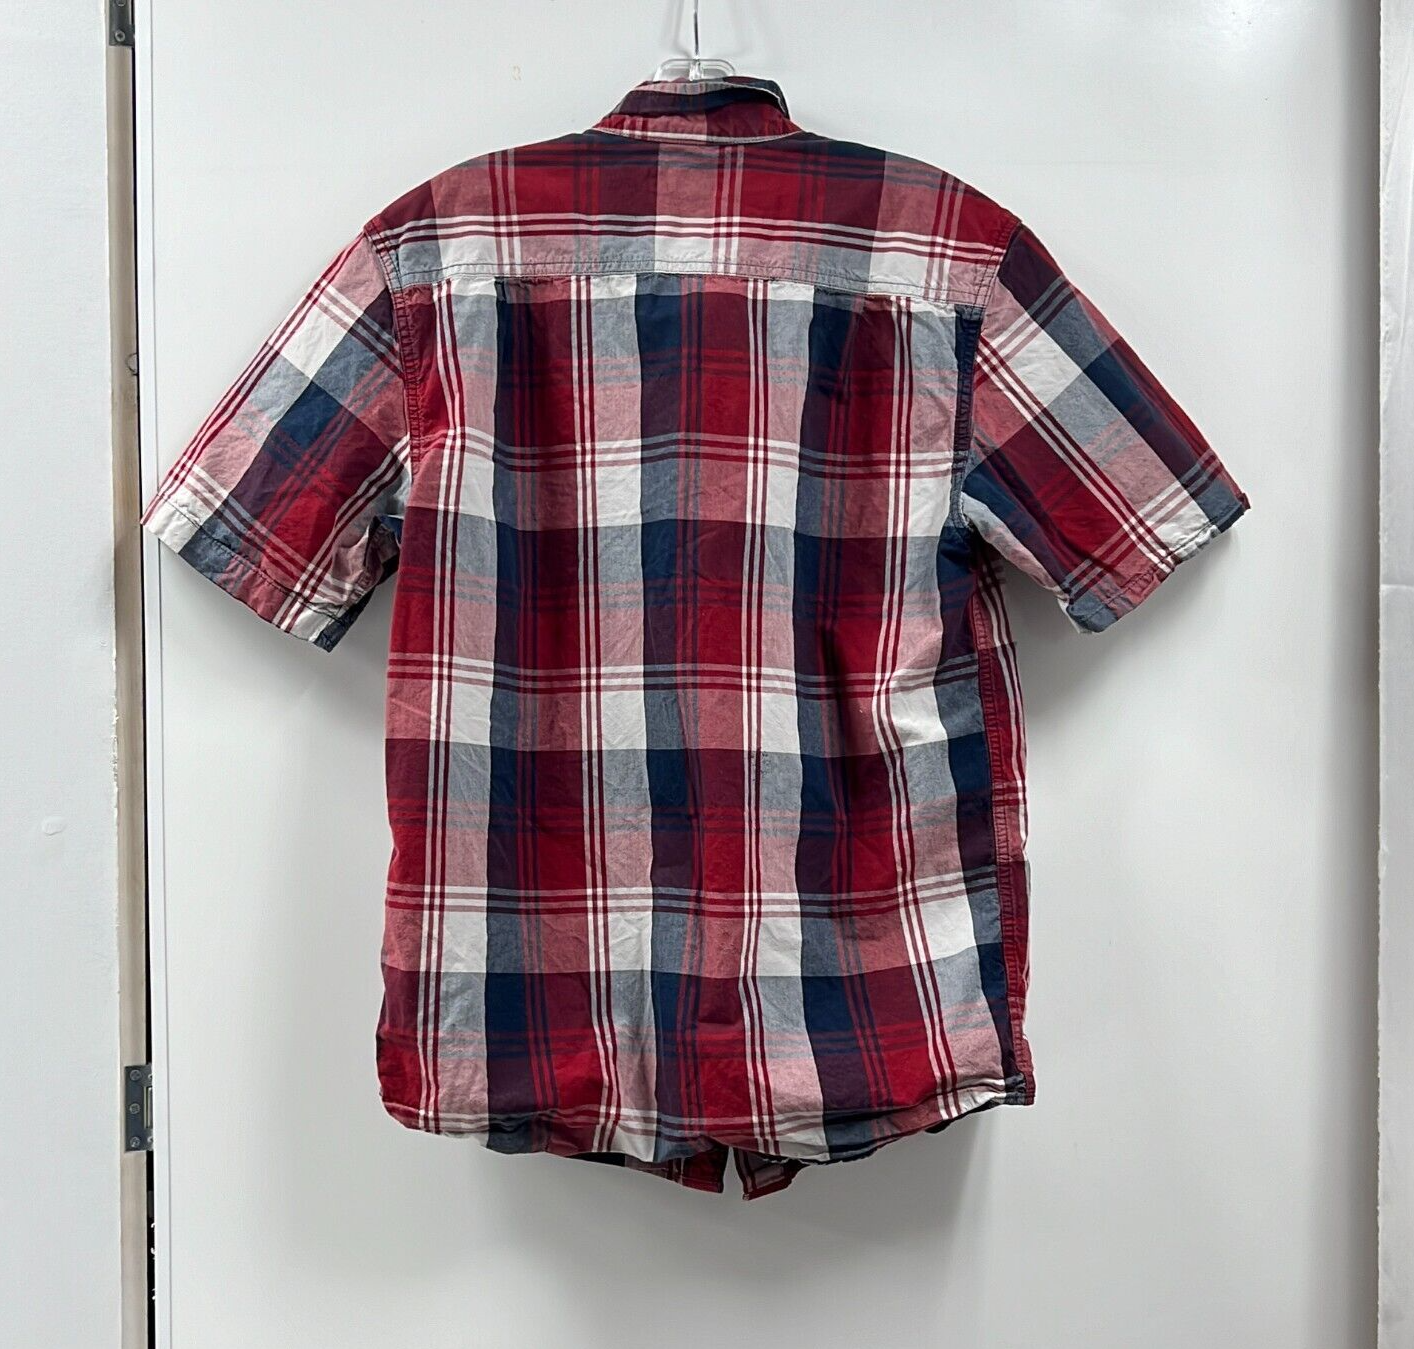 Carhartt Red White Blue Plaid Cotton Short Sleeve Button-Up Shirt Size Small